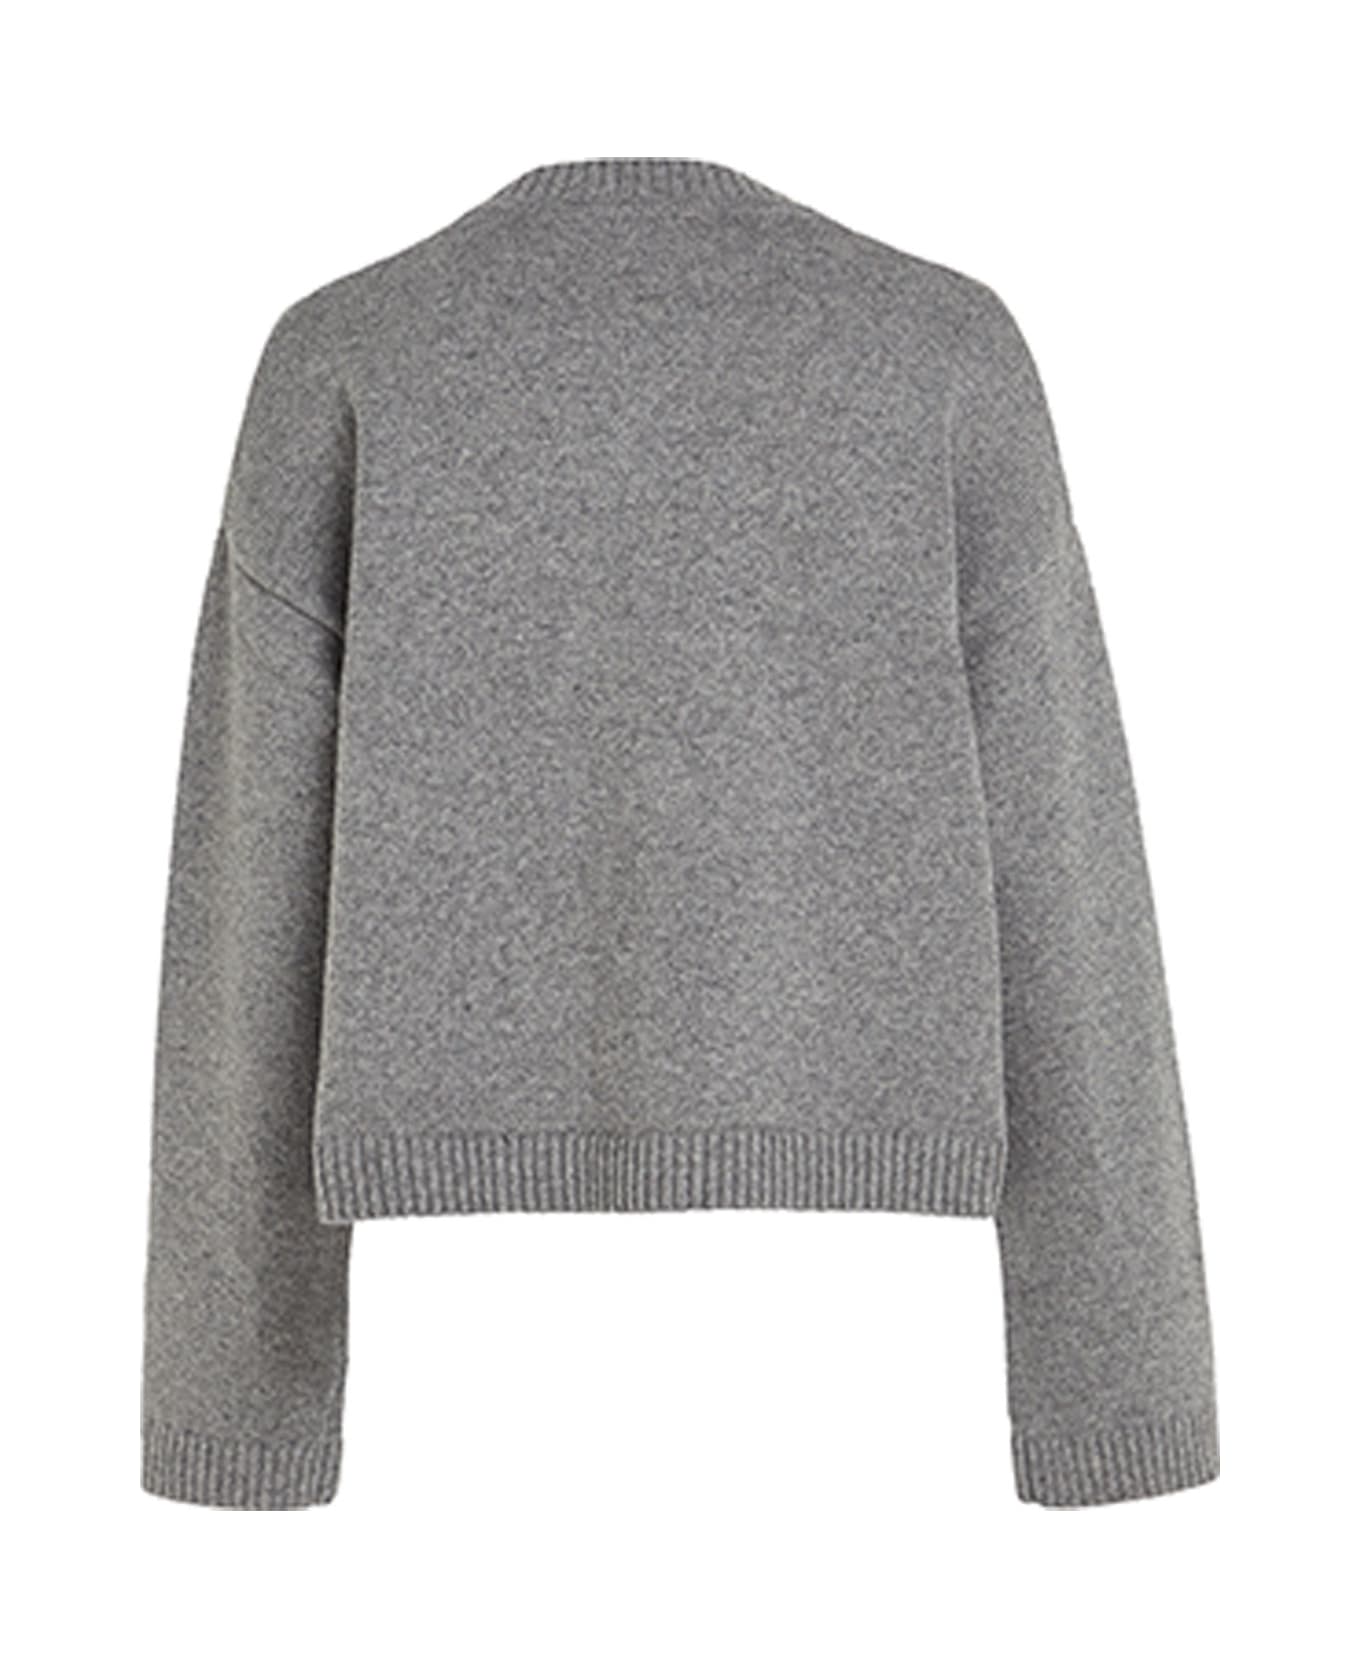 Tommy Hilfiger Gray Cardigan With Buttons - HEATHER GREY